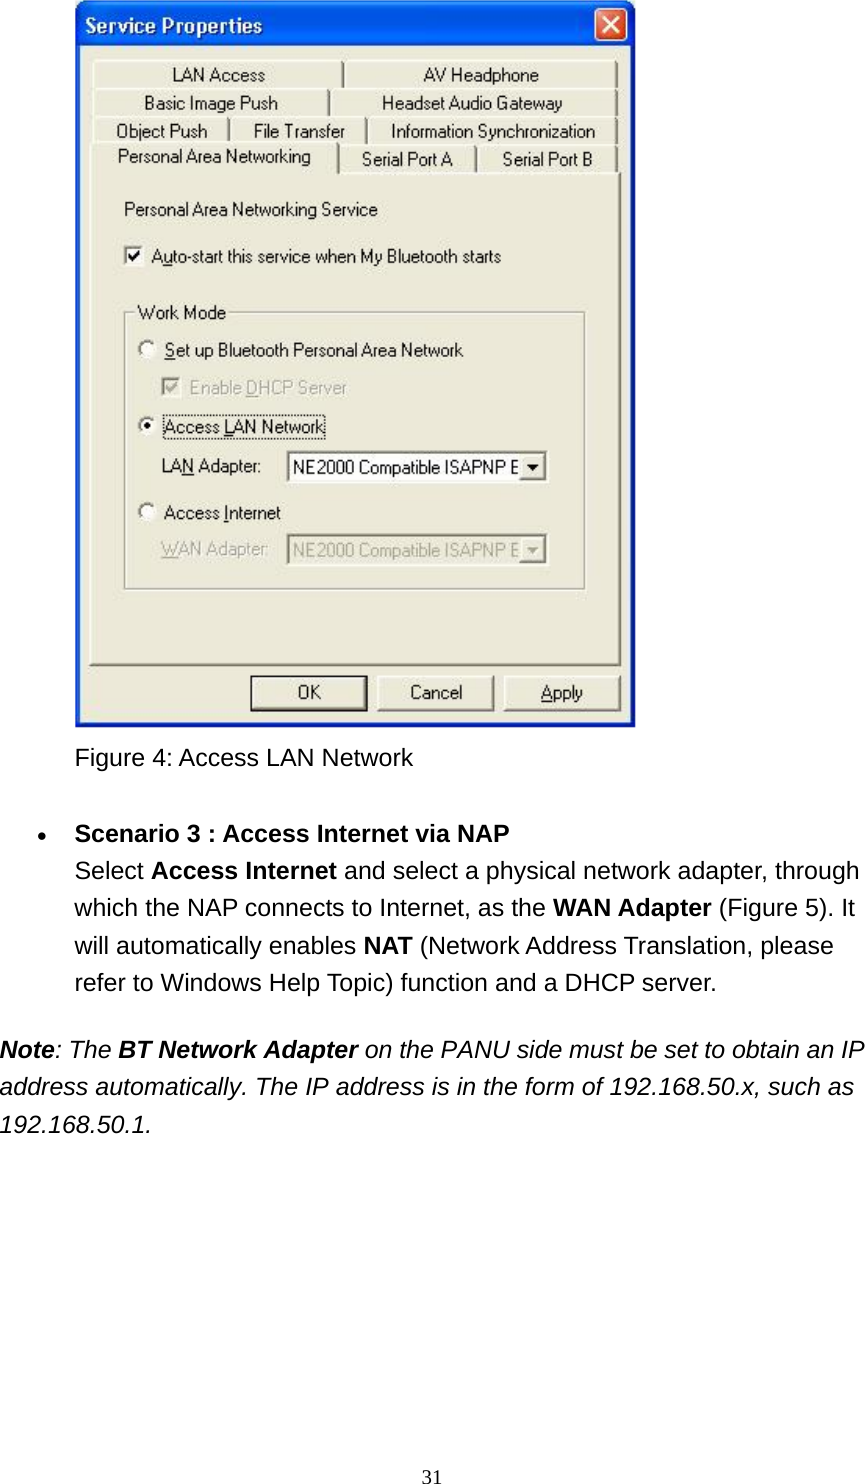   31 Figure 4: Access LAN Network     • Scenario 3 : Access Internet via NAP Select Access Internet and select a physical network adapter, through which the NAP connects to Internet, as the WAN Adapter (Figure 5). It will automatically enables NAT (Network Address Translation, please refer to Windows Help Topic) function and a DHCP server.    Note: The BT Network Adapter on the PANU side must be set to obtain an IP address automatically. The IP address is in the form of 192.168.50.x, such as 192.168.50.1. 